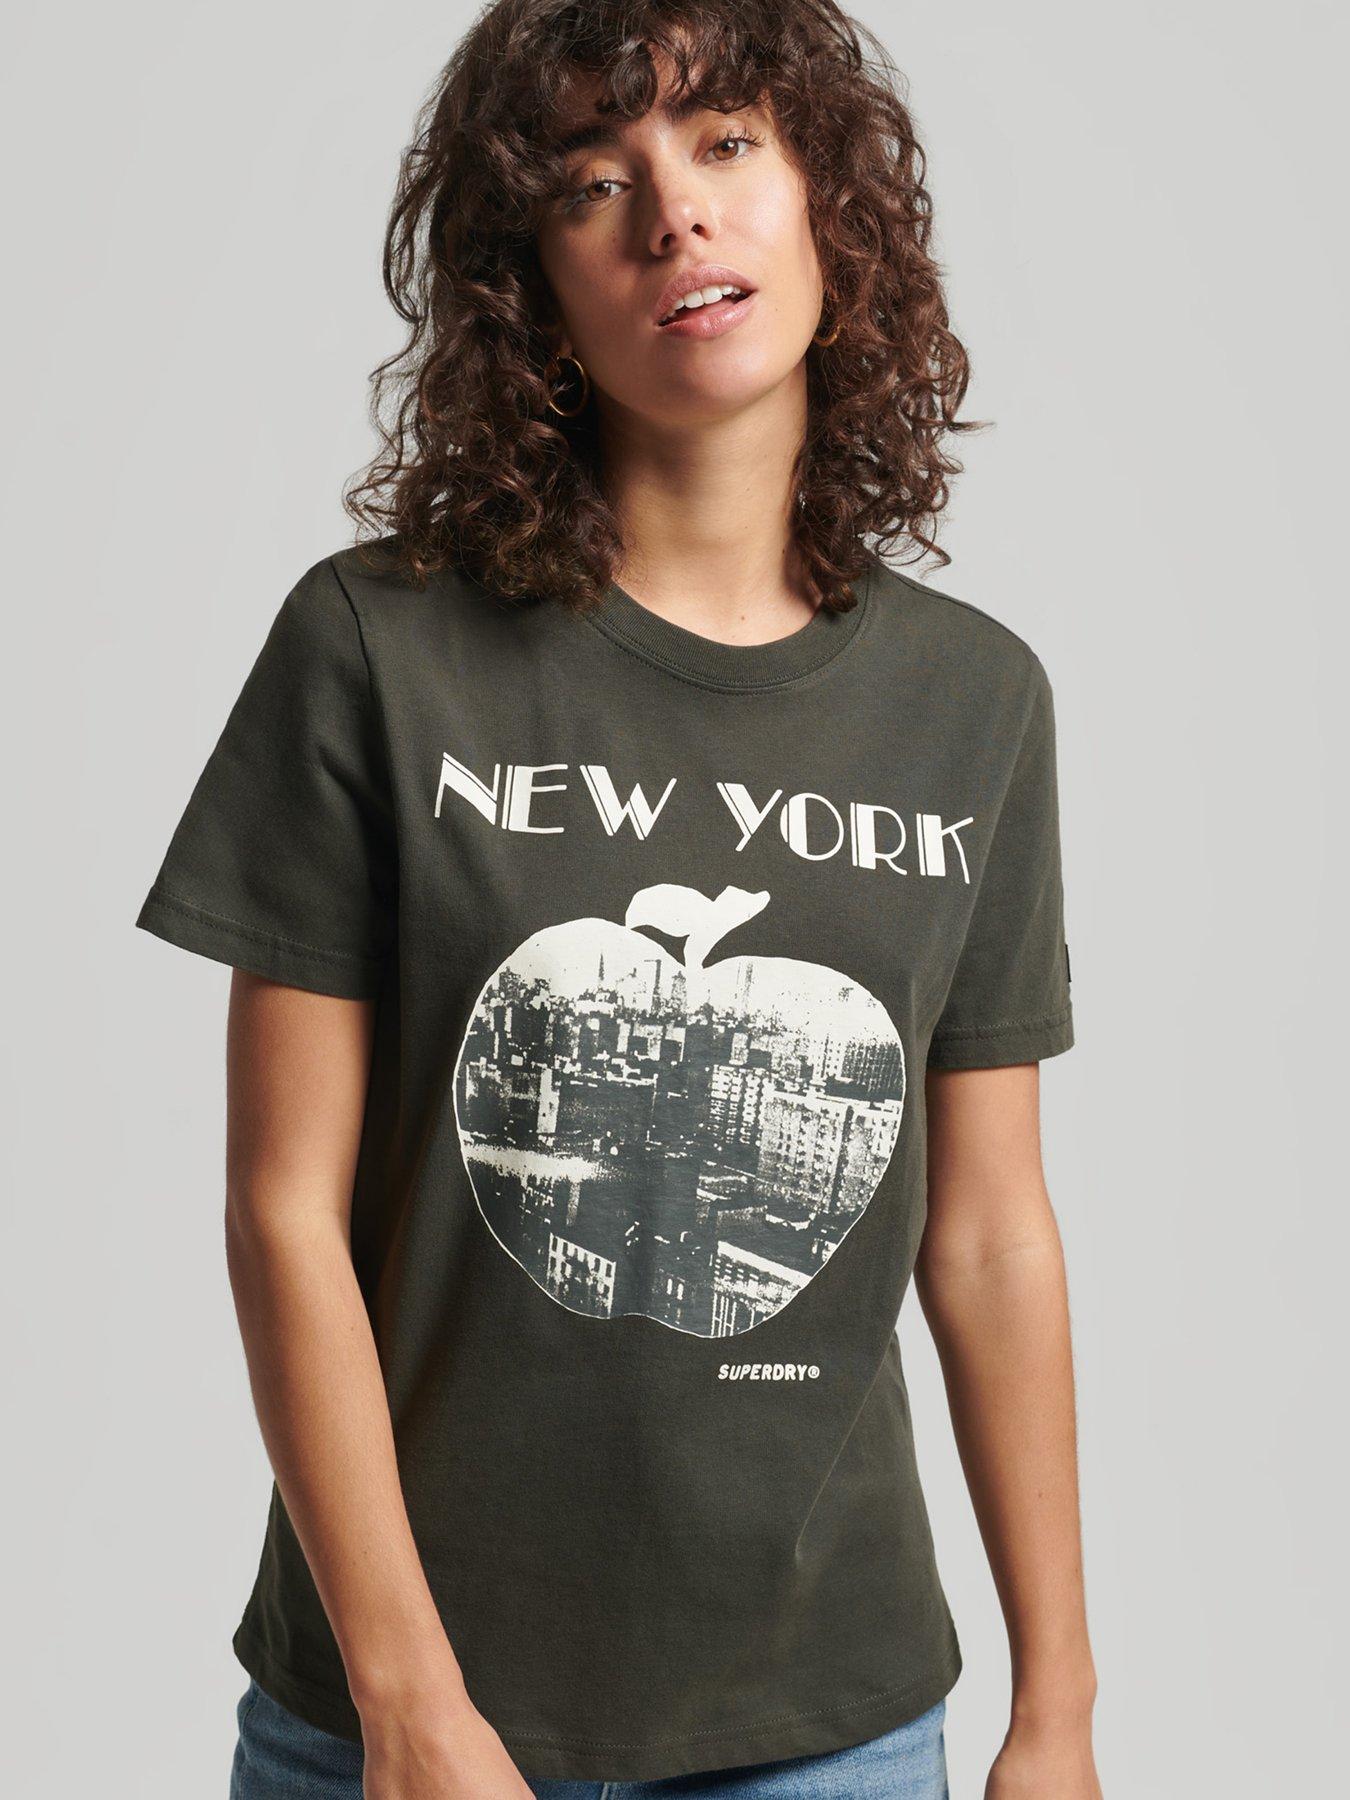  100% Cotton New York Tee - Washed Black